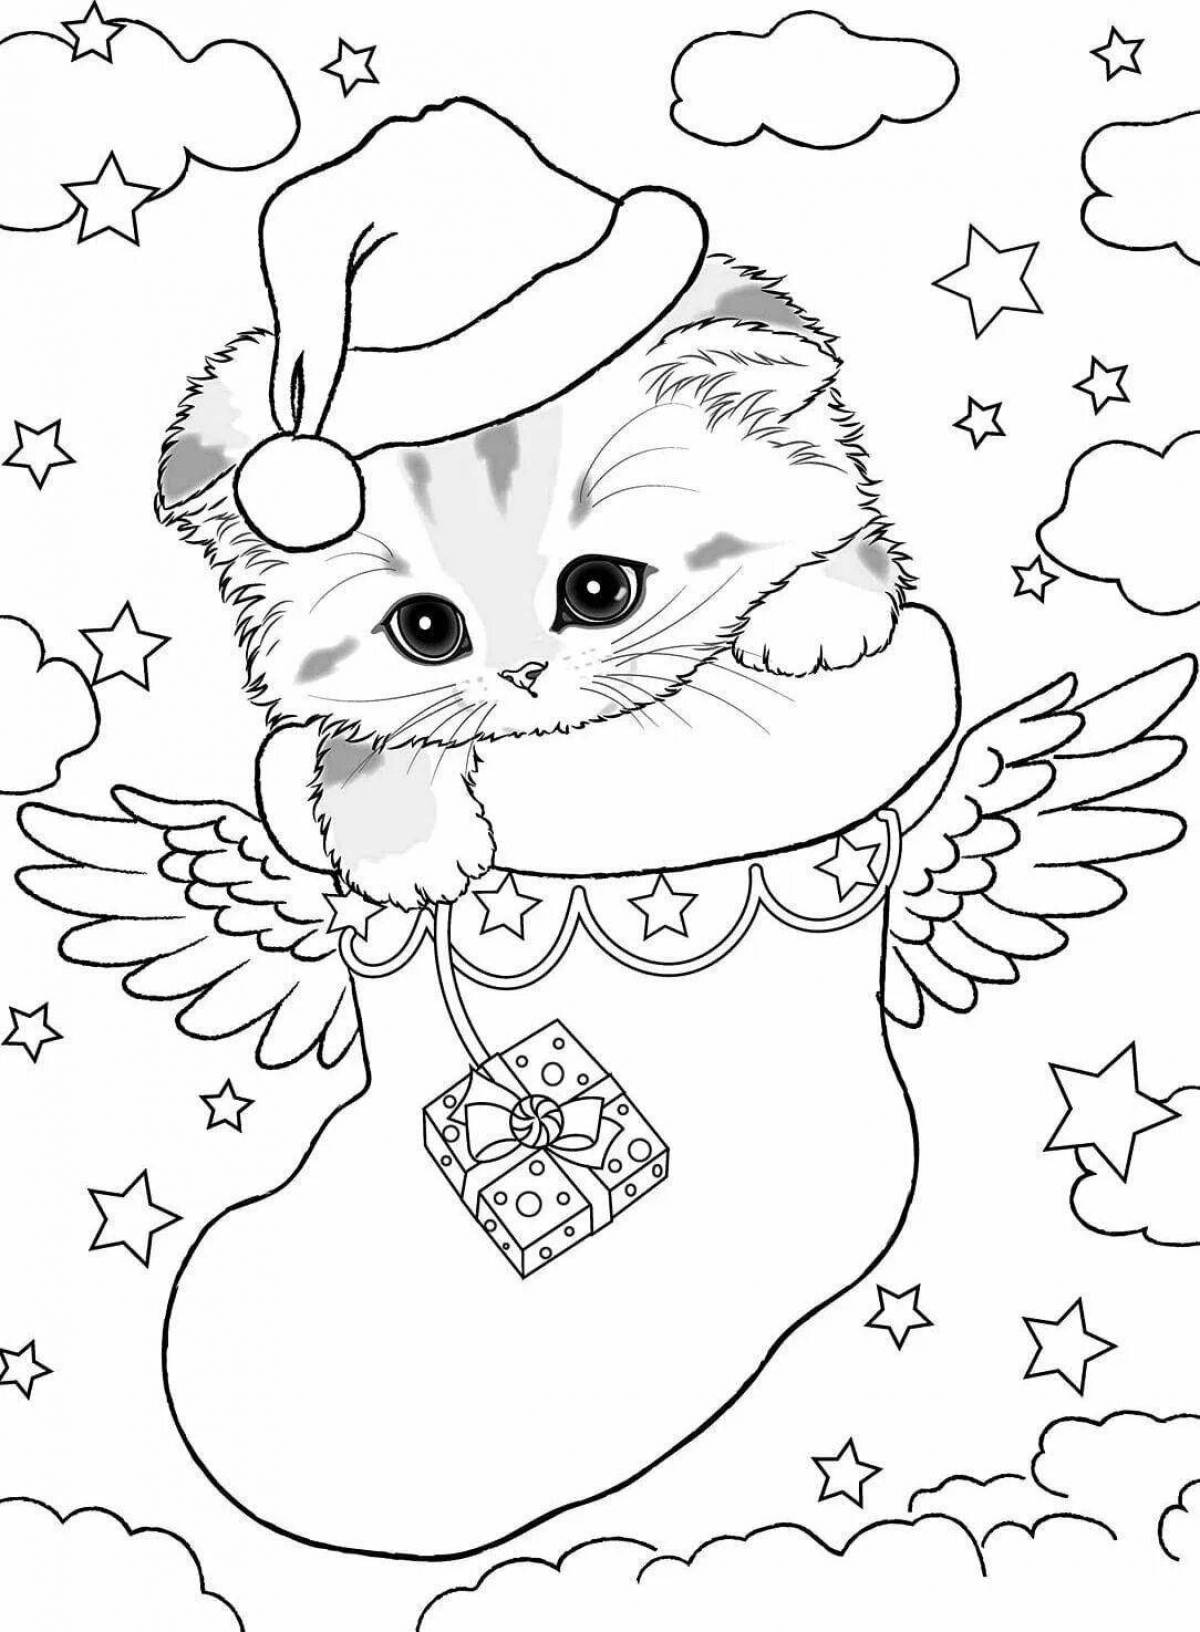 Chic Christmas coloring book for a 10 year old girl